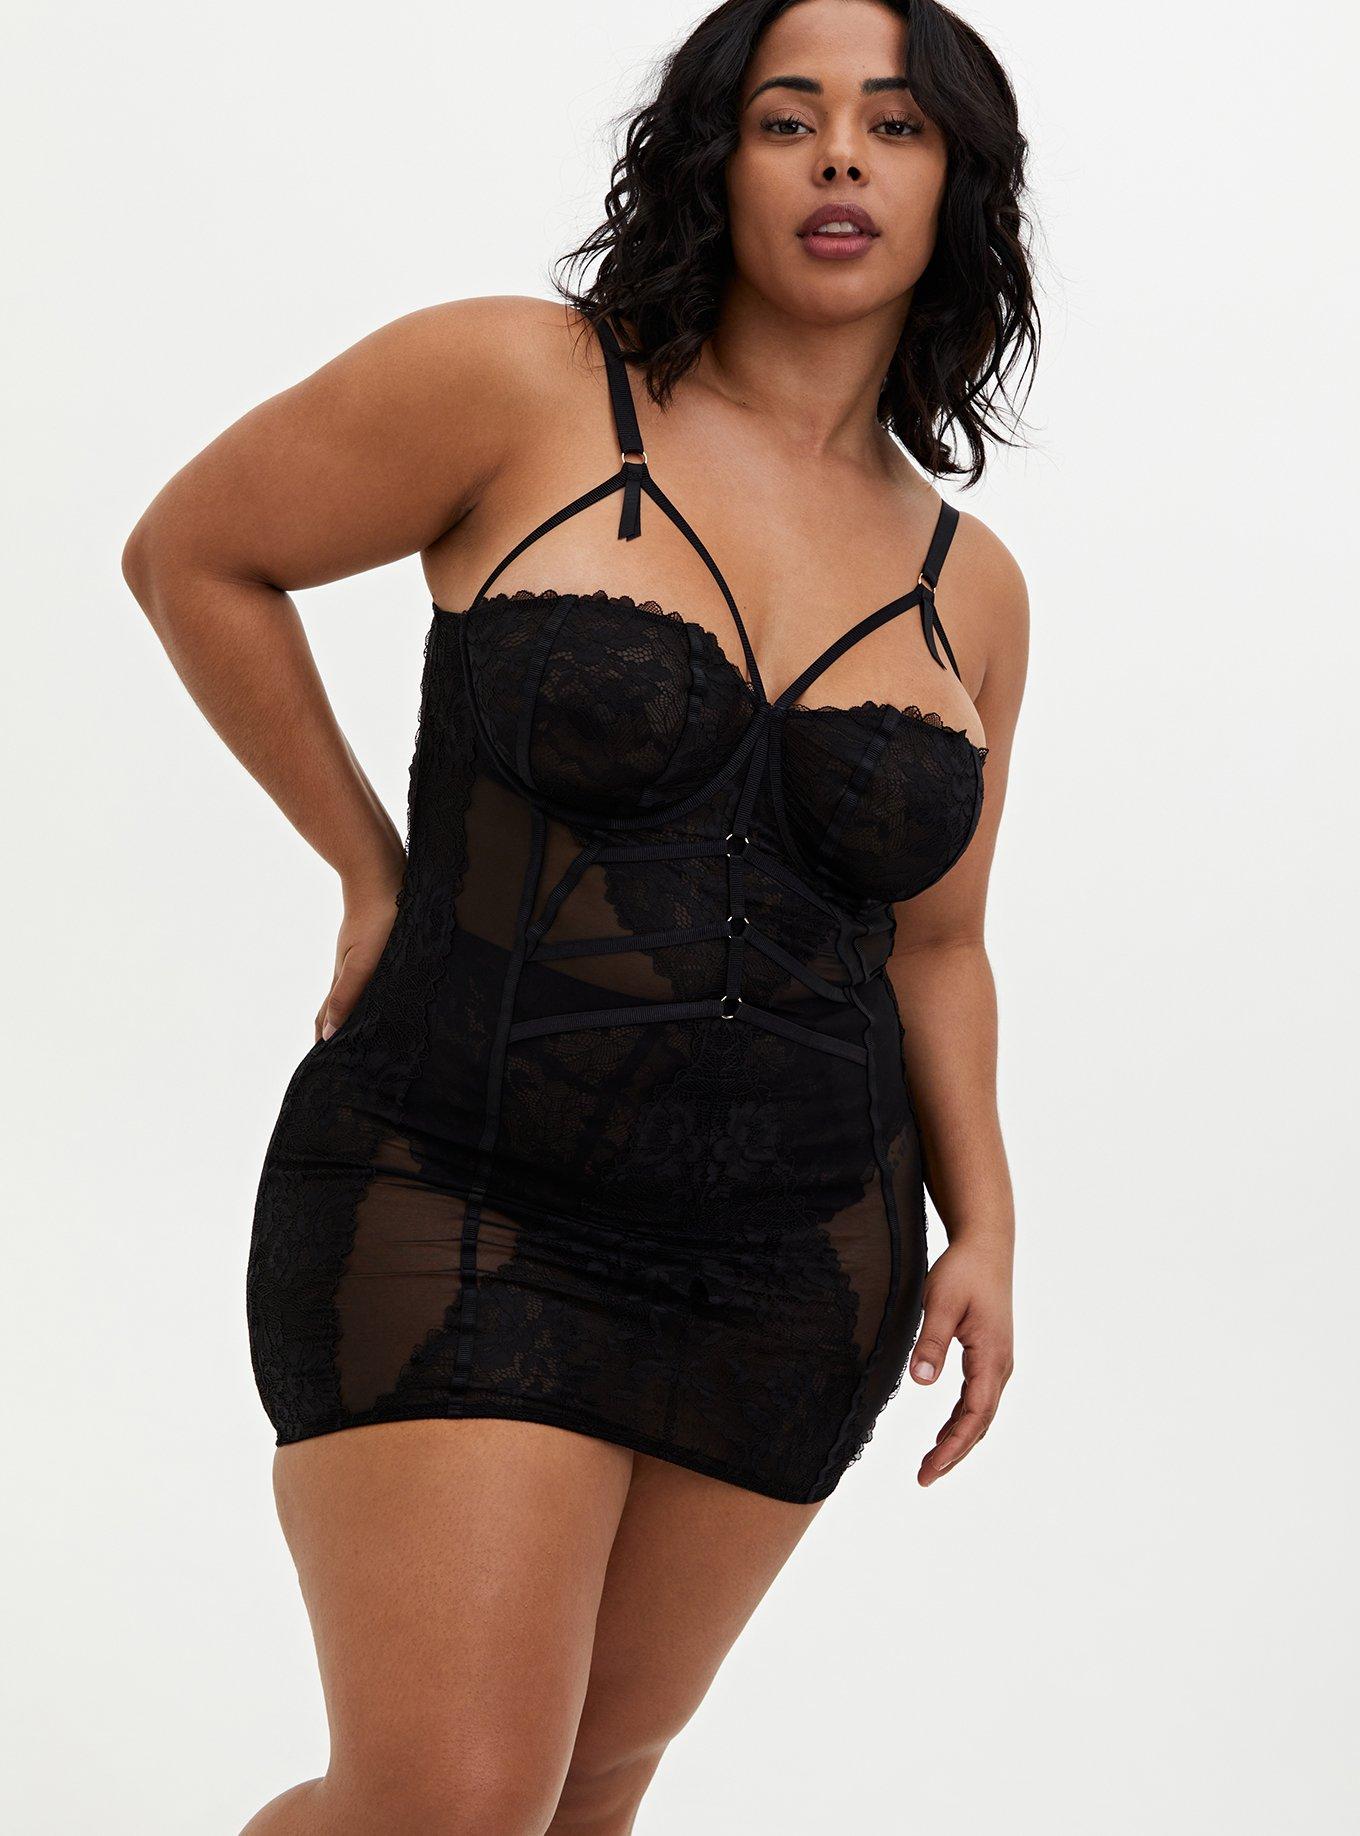 Plus Size - Black Strappy Chantilly Lace Underwire Chemise - Torrid